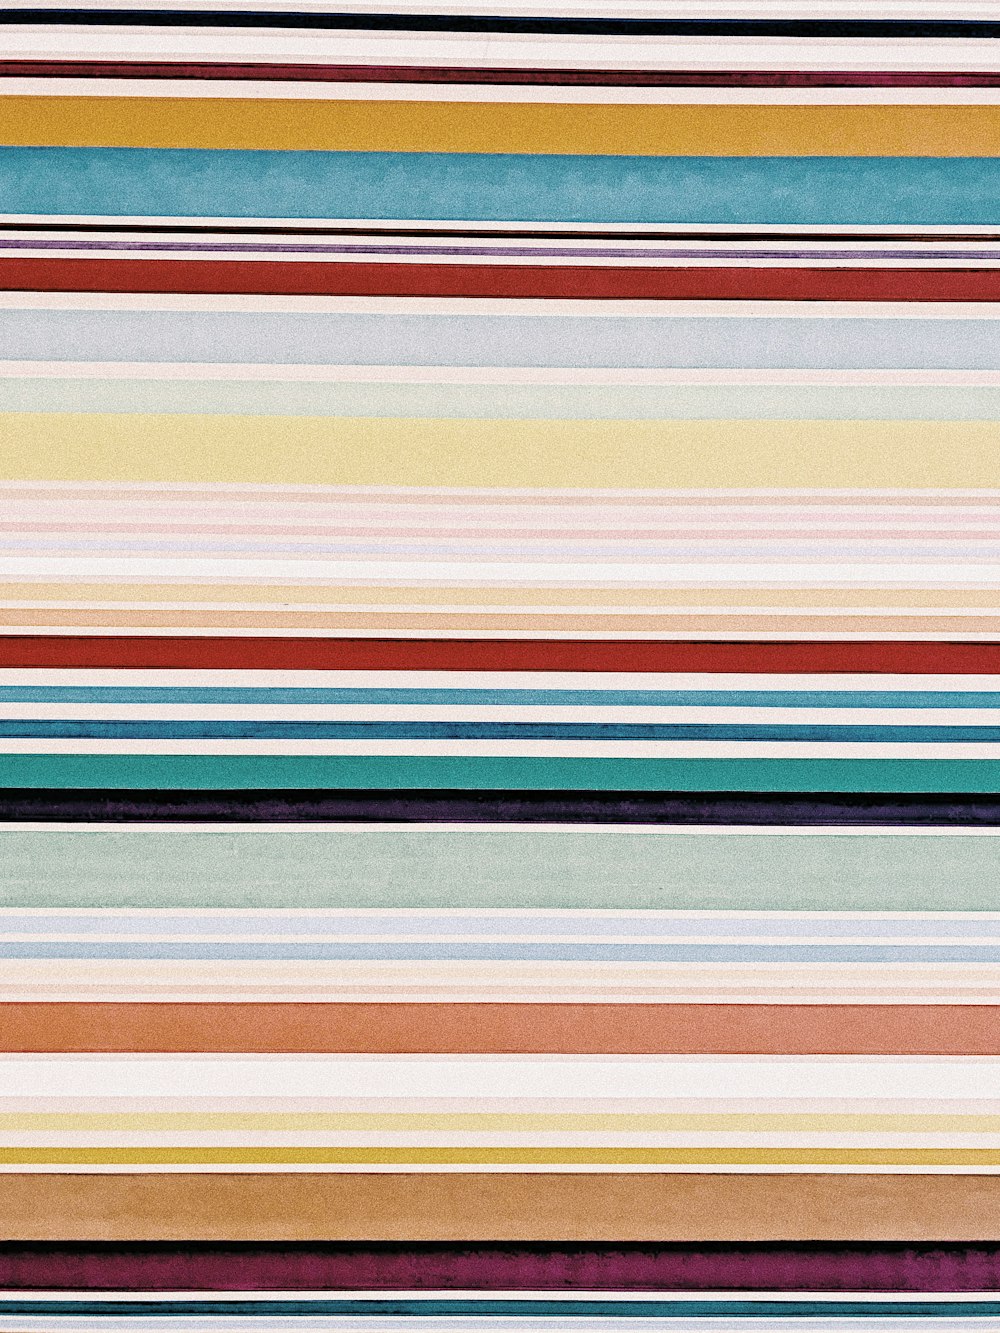 a multicolored striped wallpaper with vertical stripes